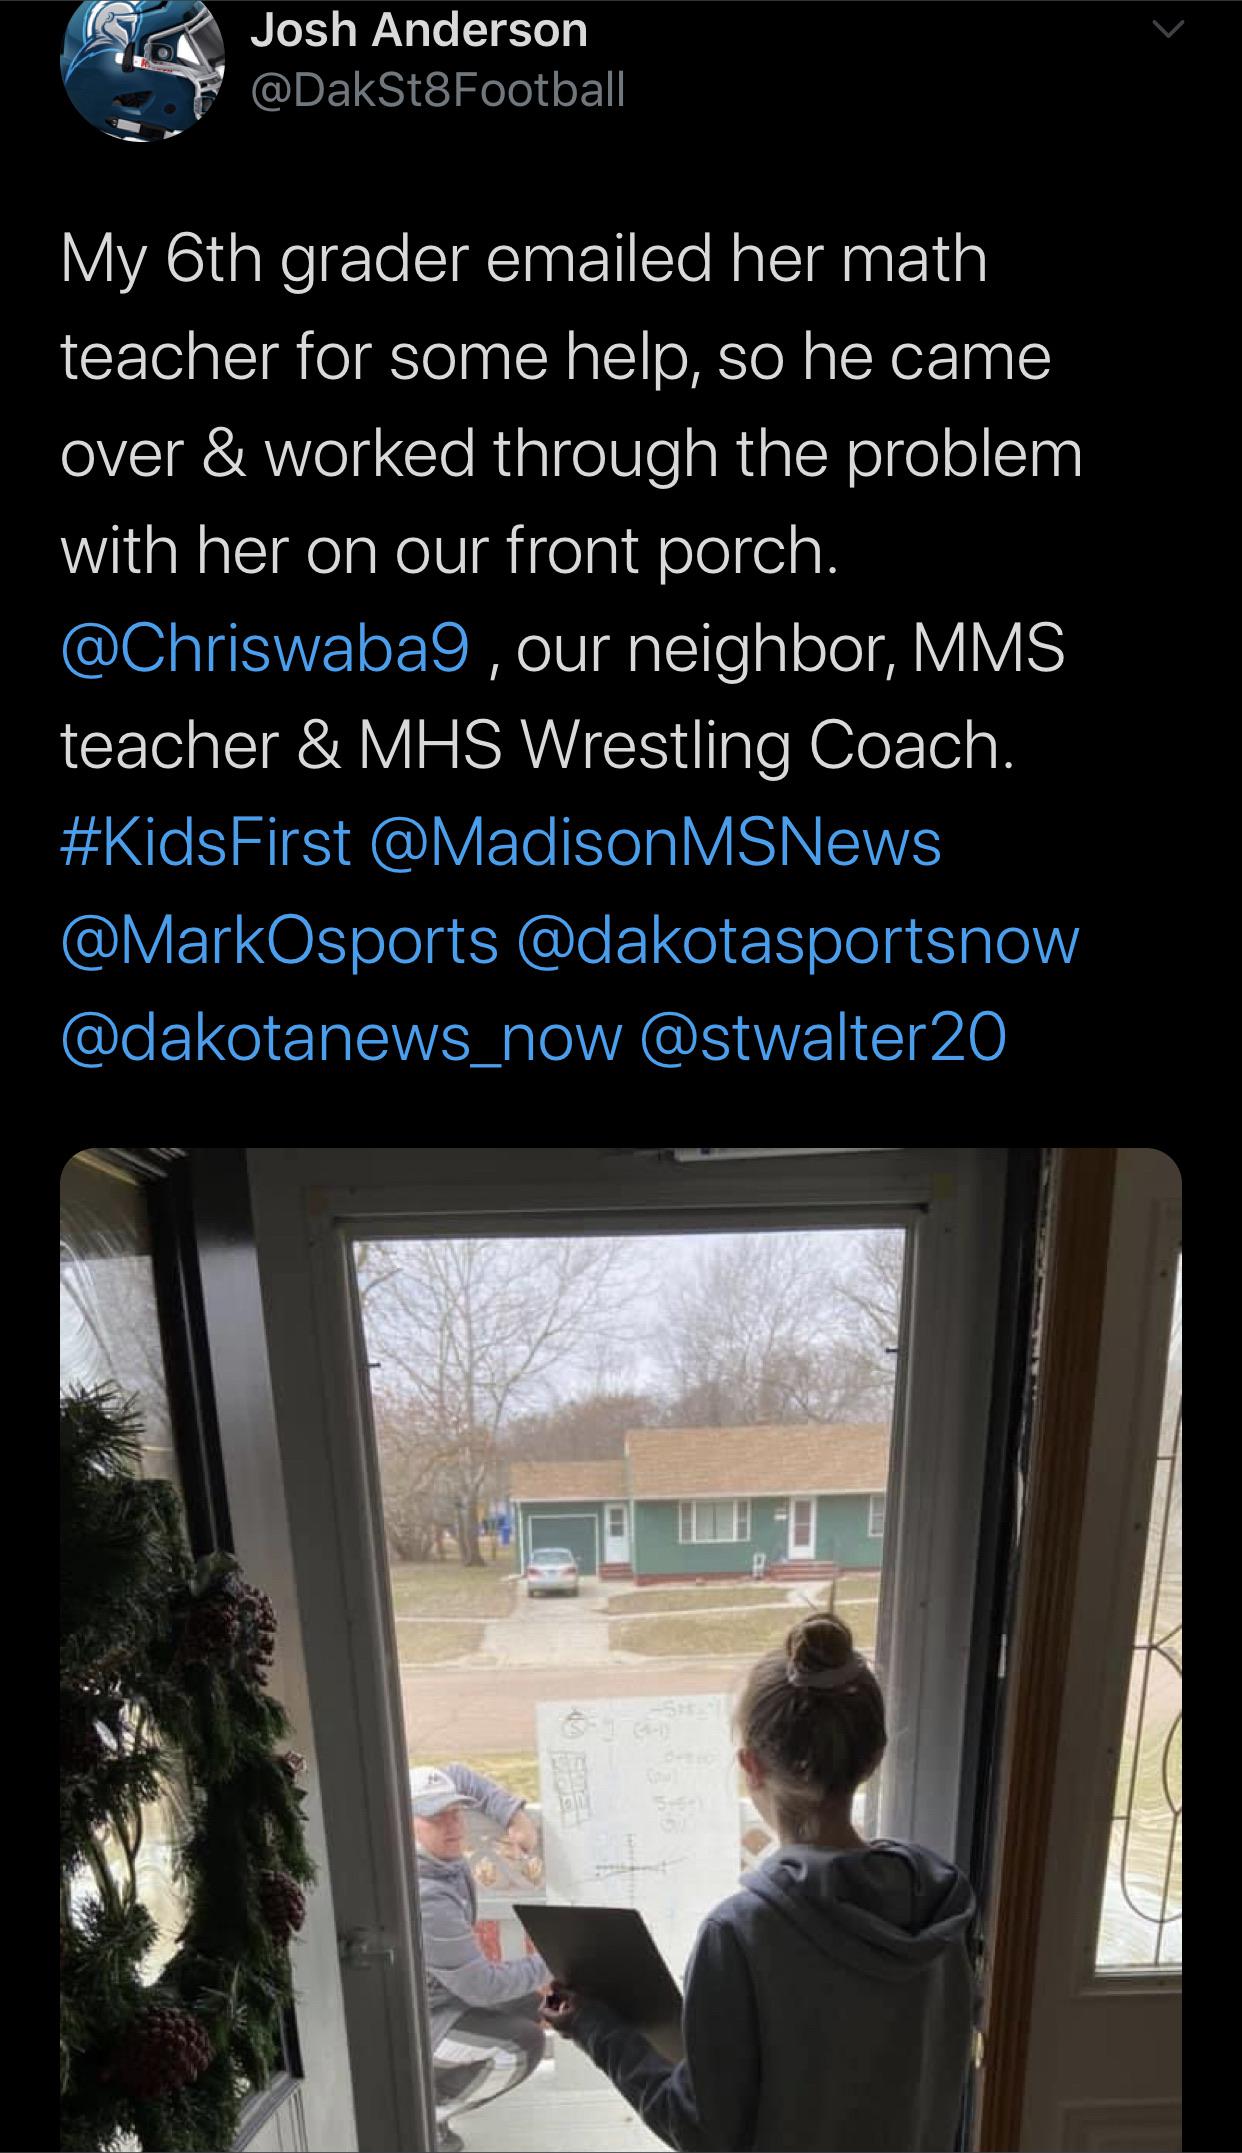 cvs coupon 2010 - Josh Anderson My 6th grader emailed her math teacher for some help, so he came over & worked through the problem with her on our front porch. , our neighbor, Mms teacher & Mhs Wrestling Coach. MSNews